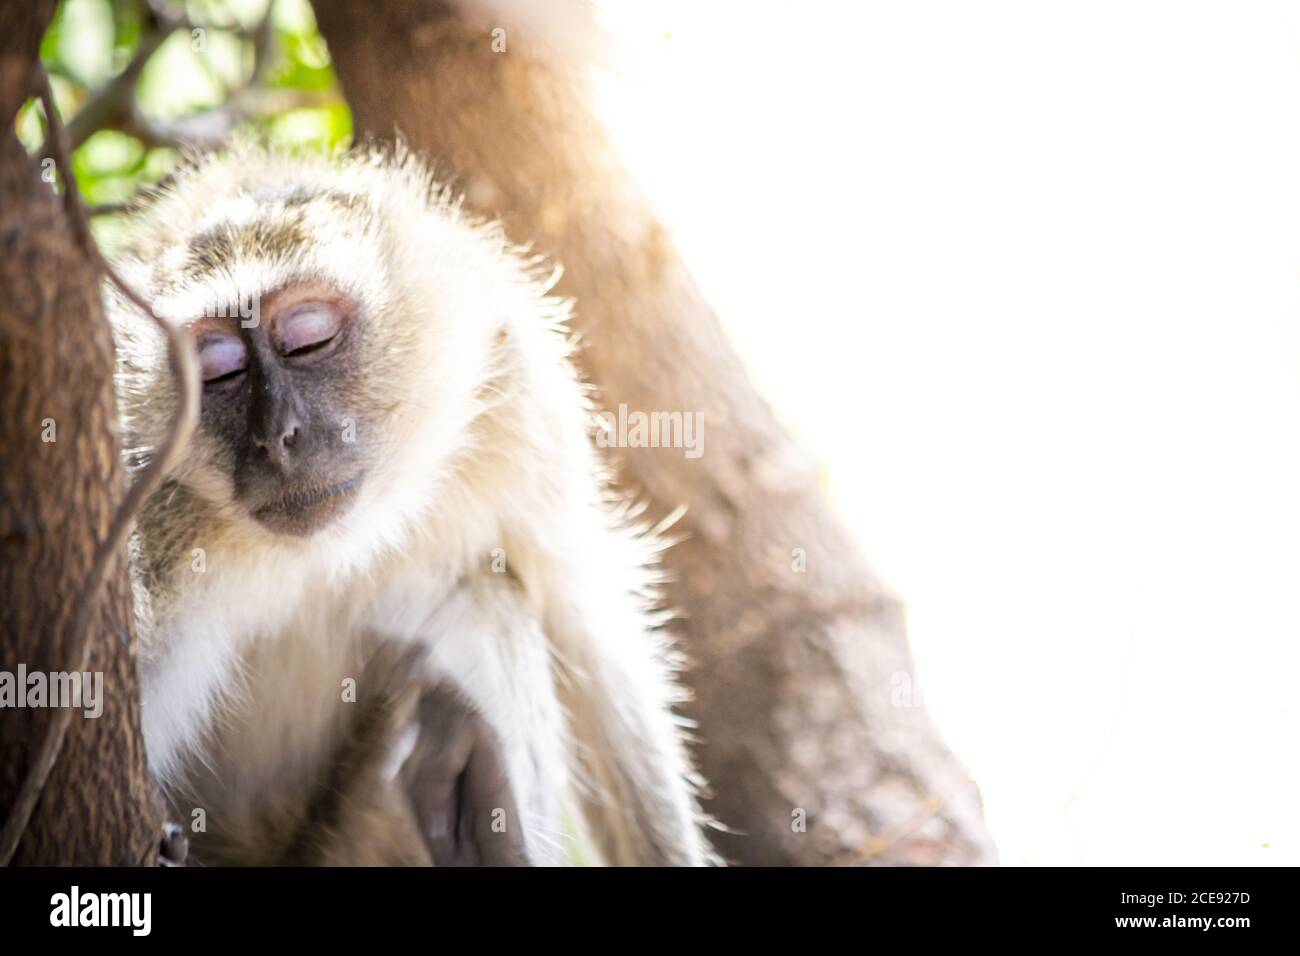 Shy and sad black faced vervet monkey looking away from camera, showing emotions with closed eyes Stock Photo